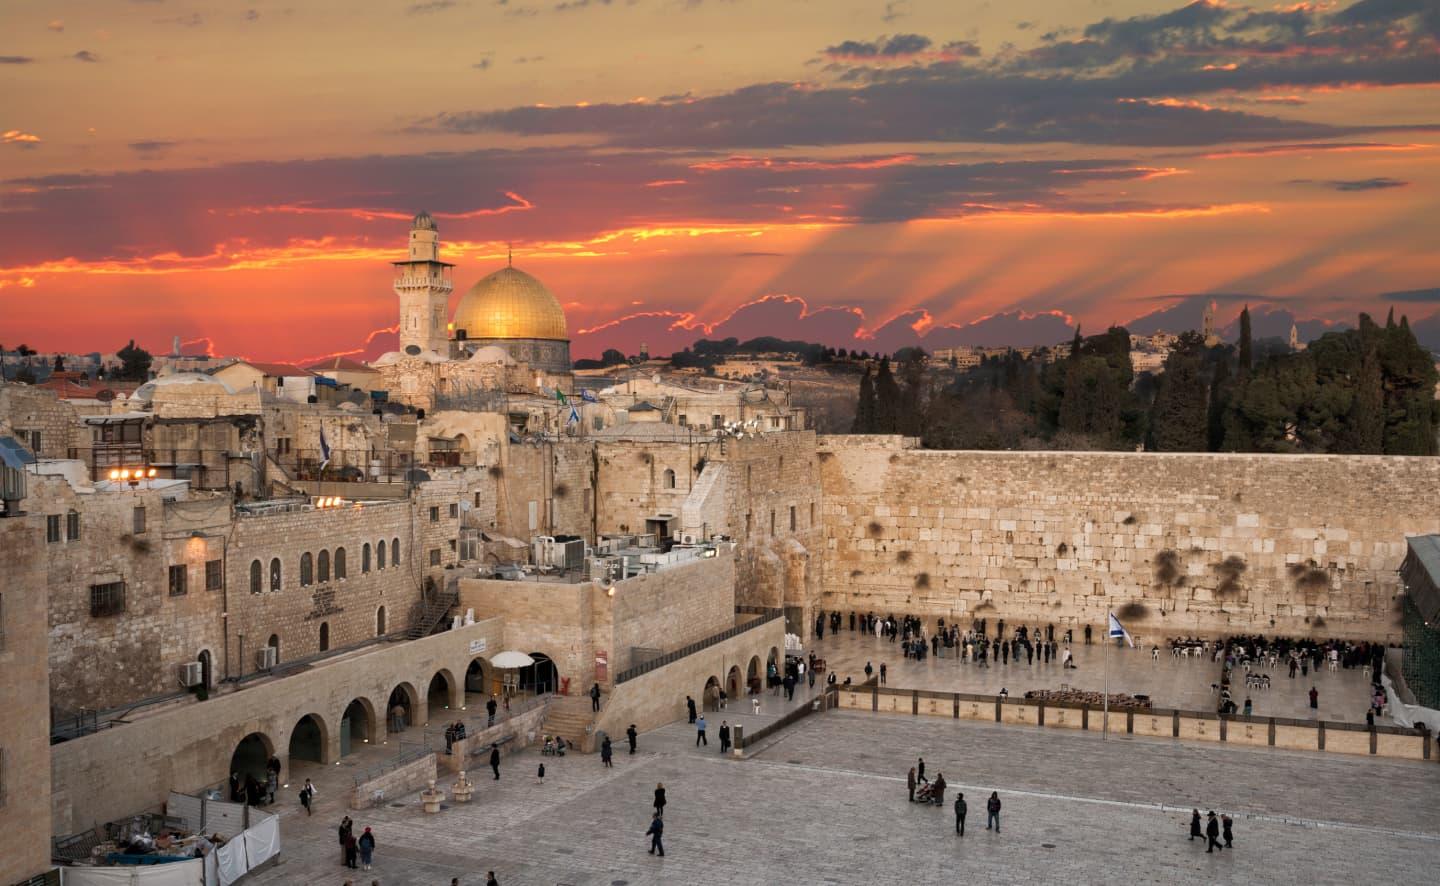 Join Pastor Travis Robertson in The Holy Land - Israel 